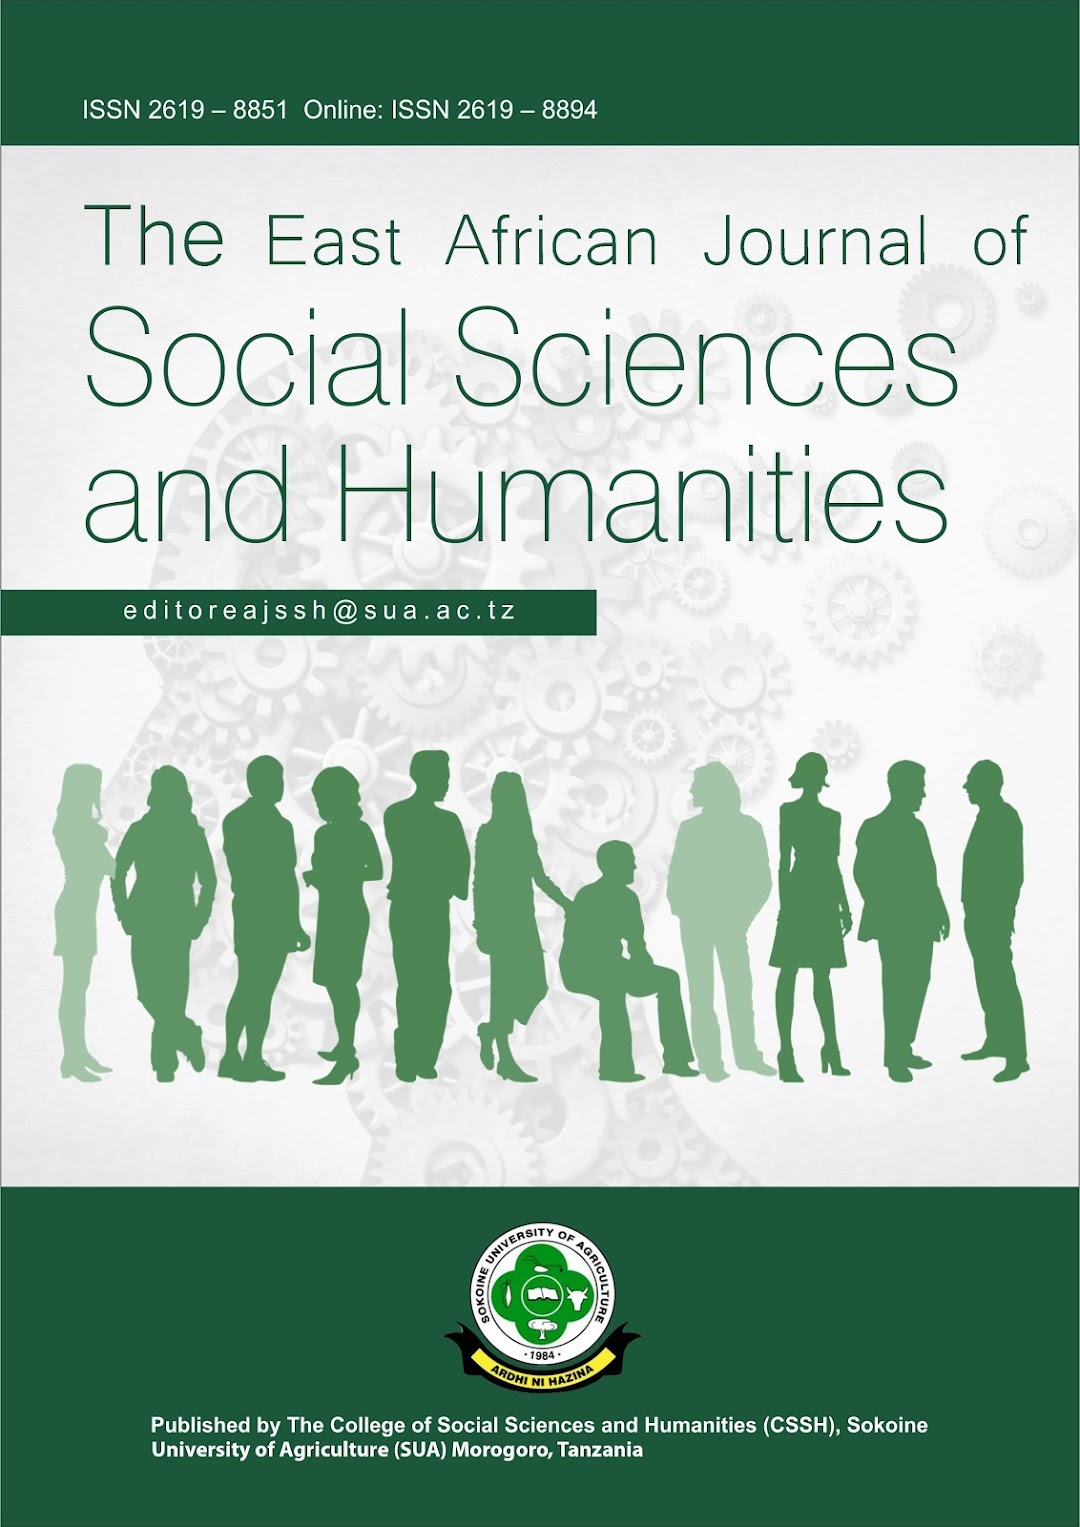 The East African Journal of Social Sciences and Humanities